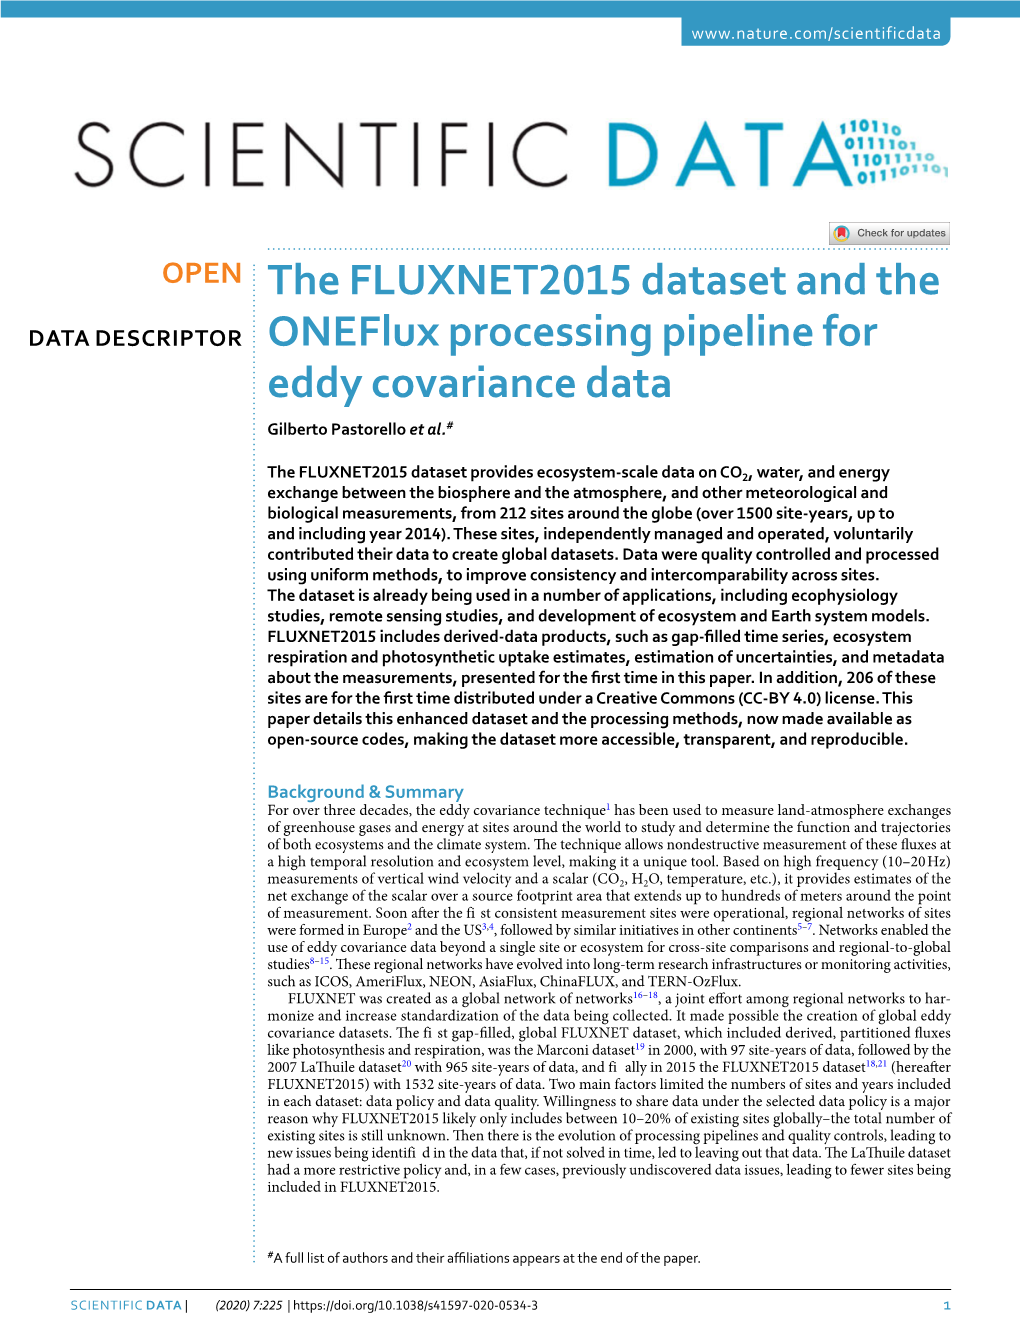 The FLUXNET2015 Dataset and the Oneflux Processing Pipeline For